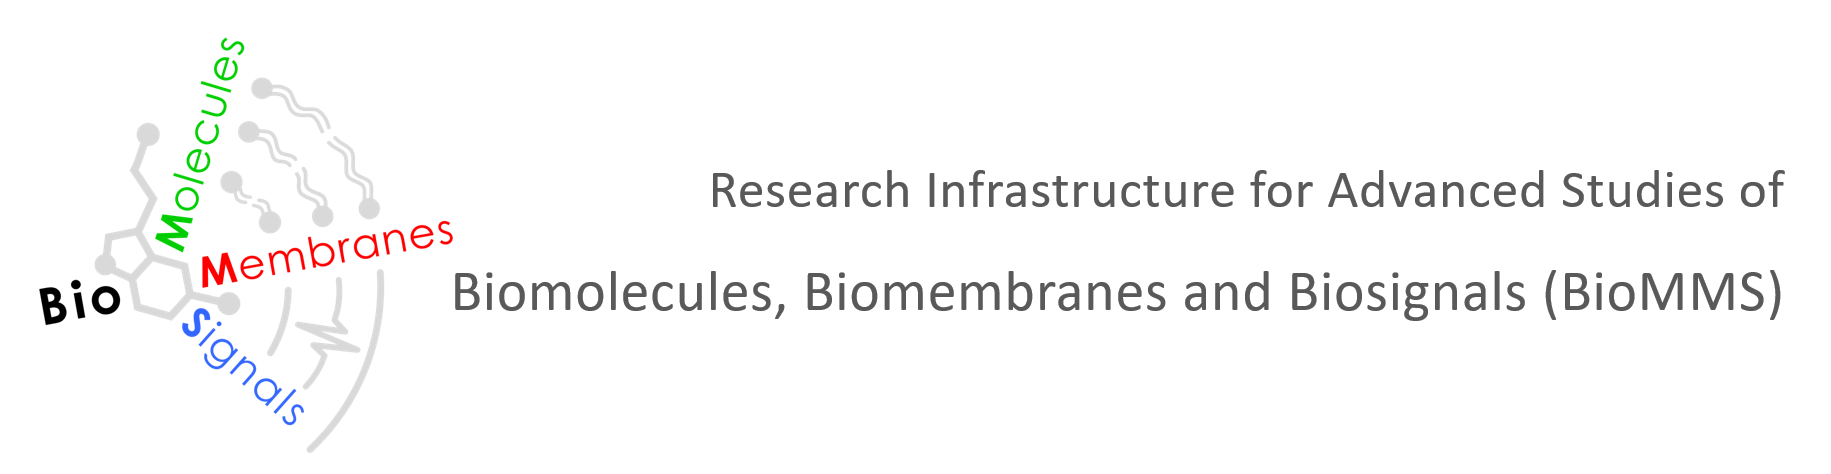 Research Infrastructure BioMMS